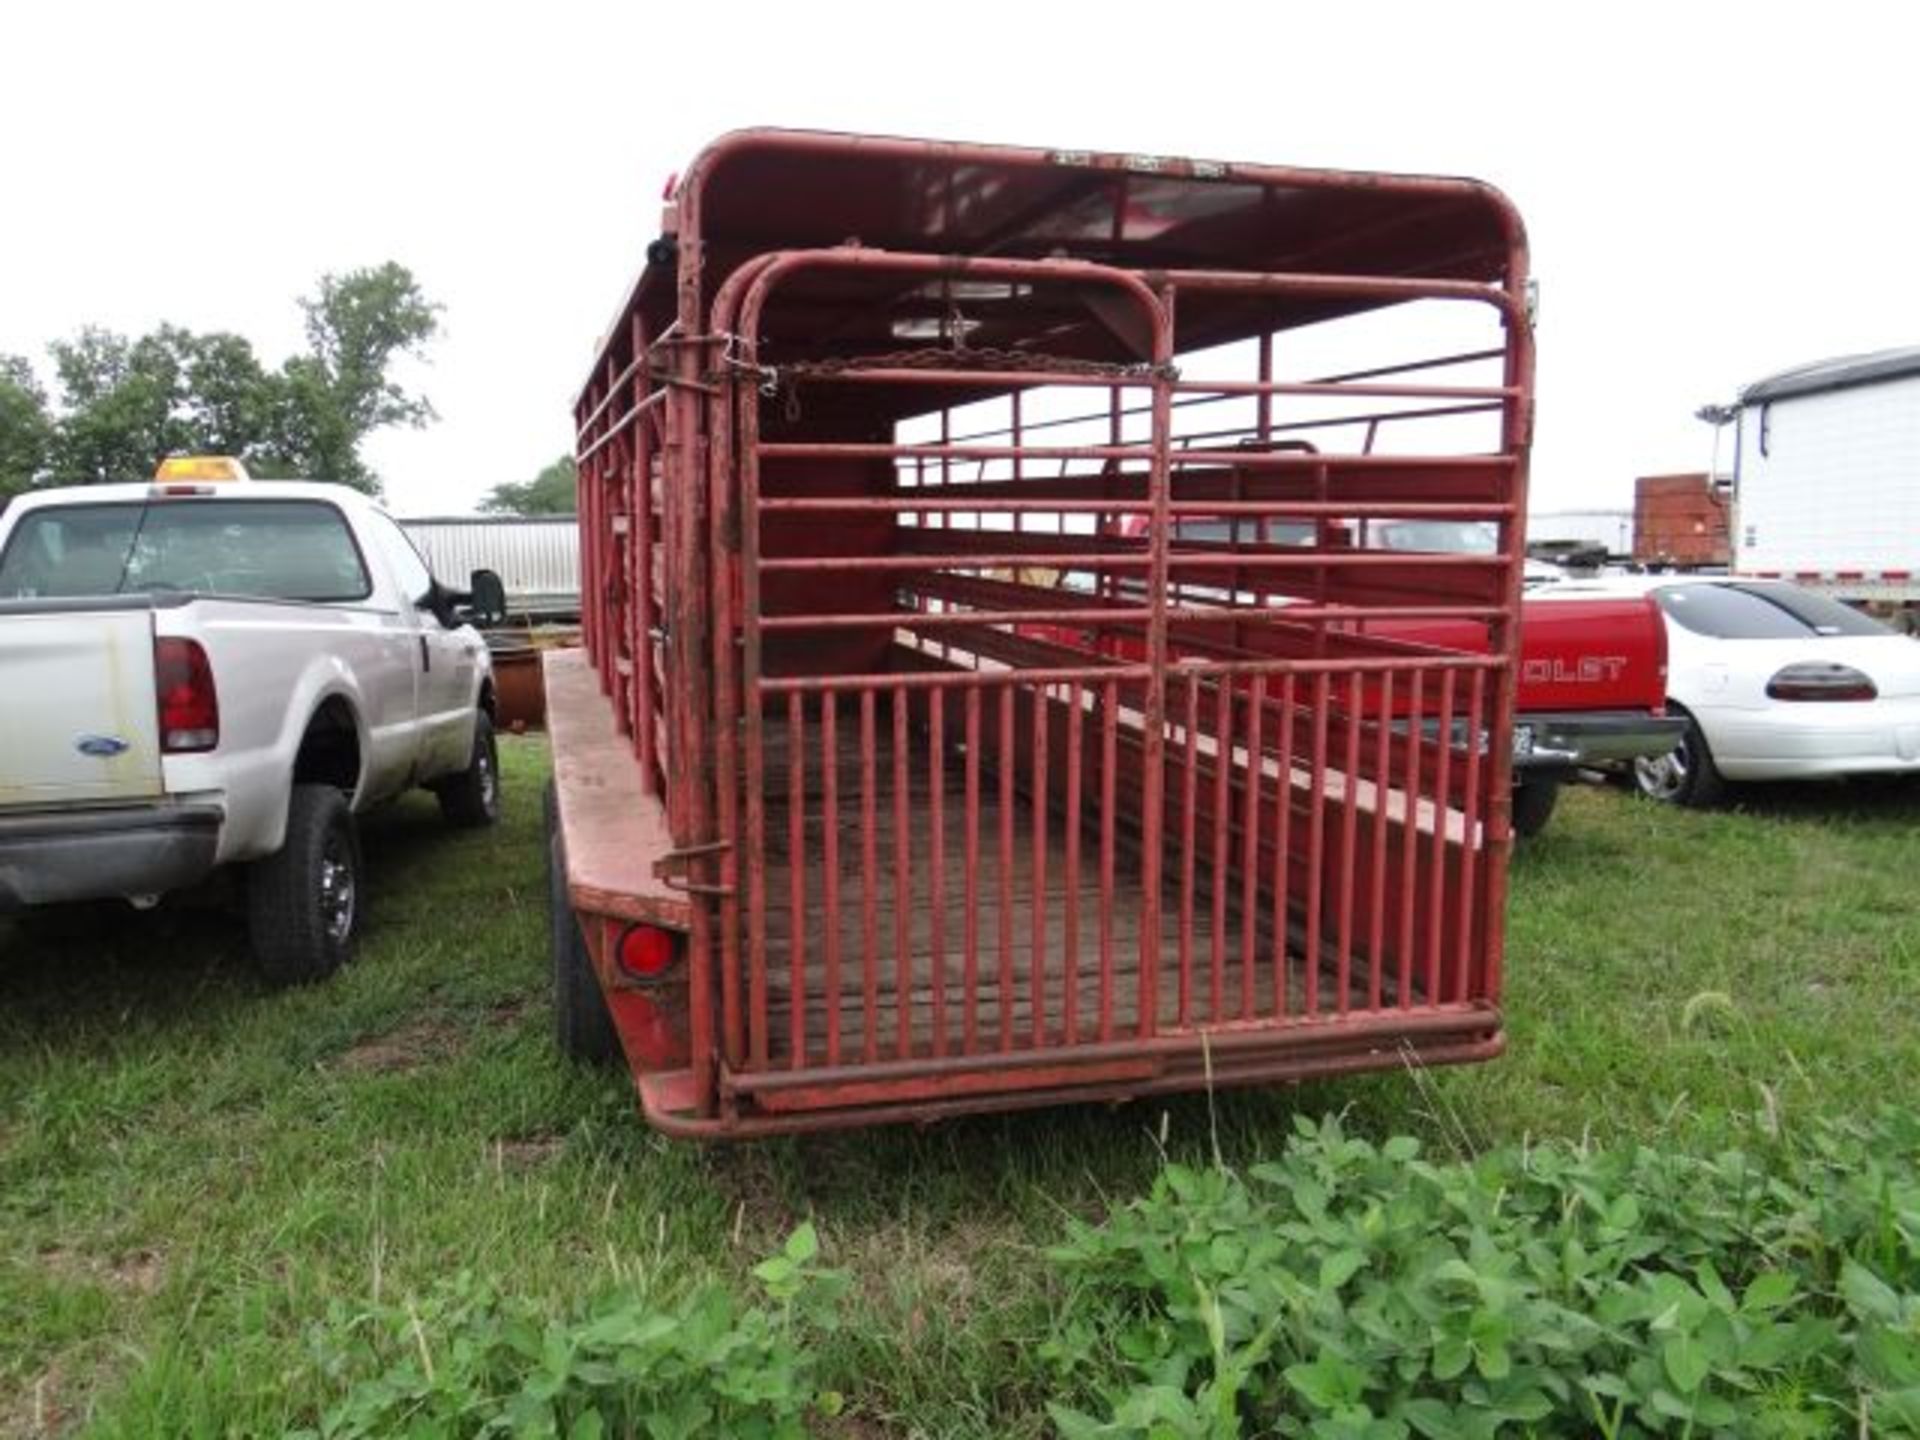 1991 WW Livestock Trailer 20', 7' Wide, Gooseneck, Center Gate, Title in the Office - Image 3 of 3